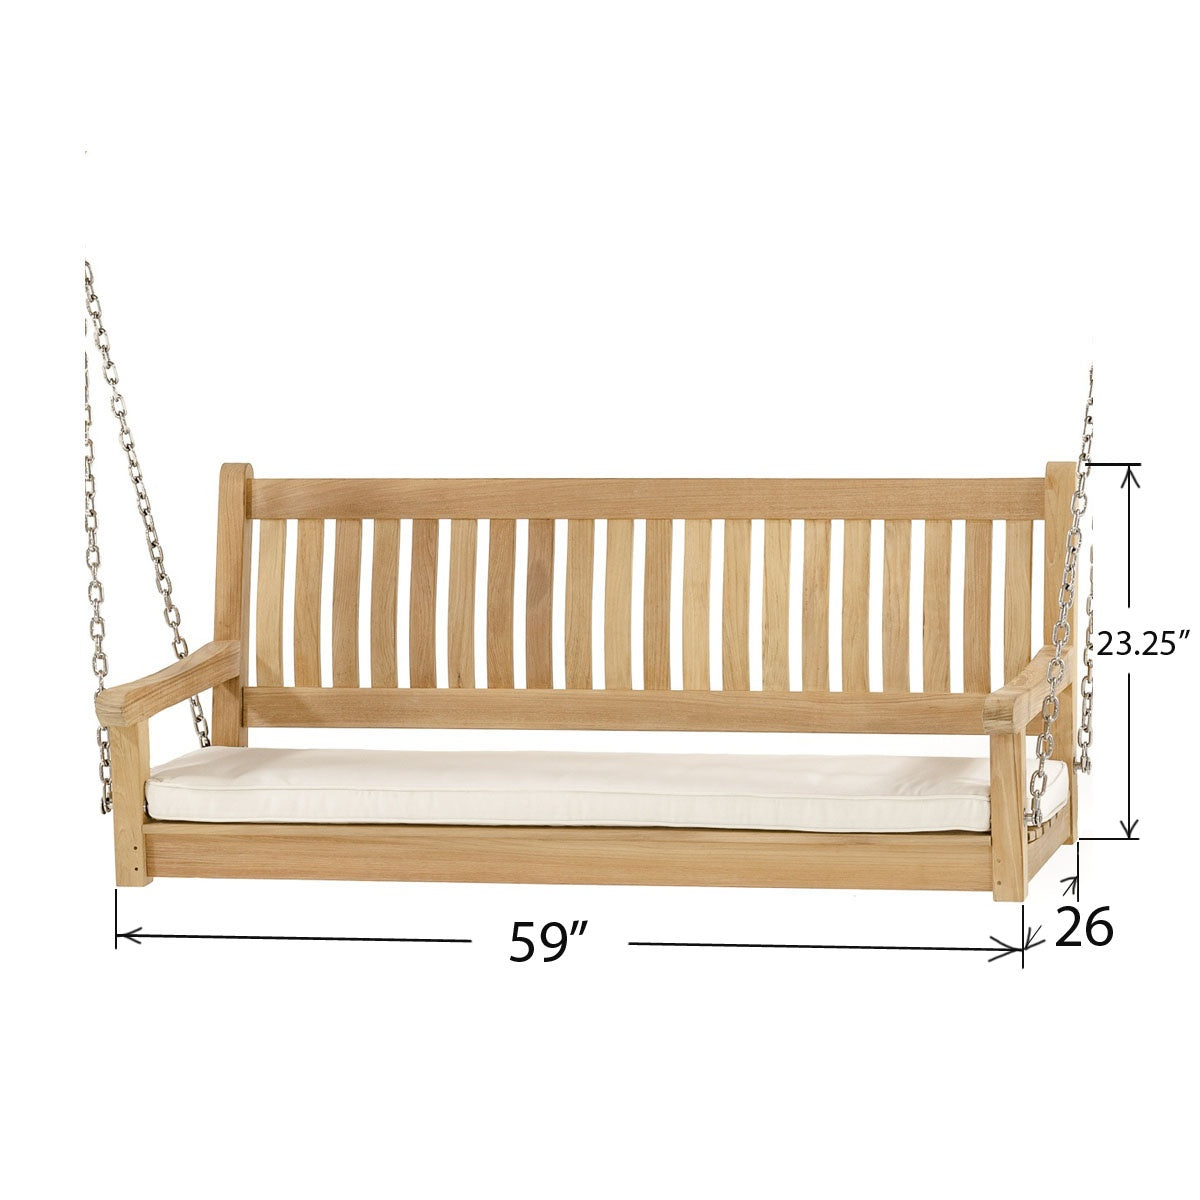 Westminster Teak - Teak Porch Swing ONLY Includes Stainless Steel Chains - 13955BO